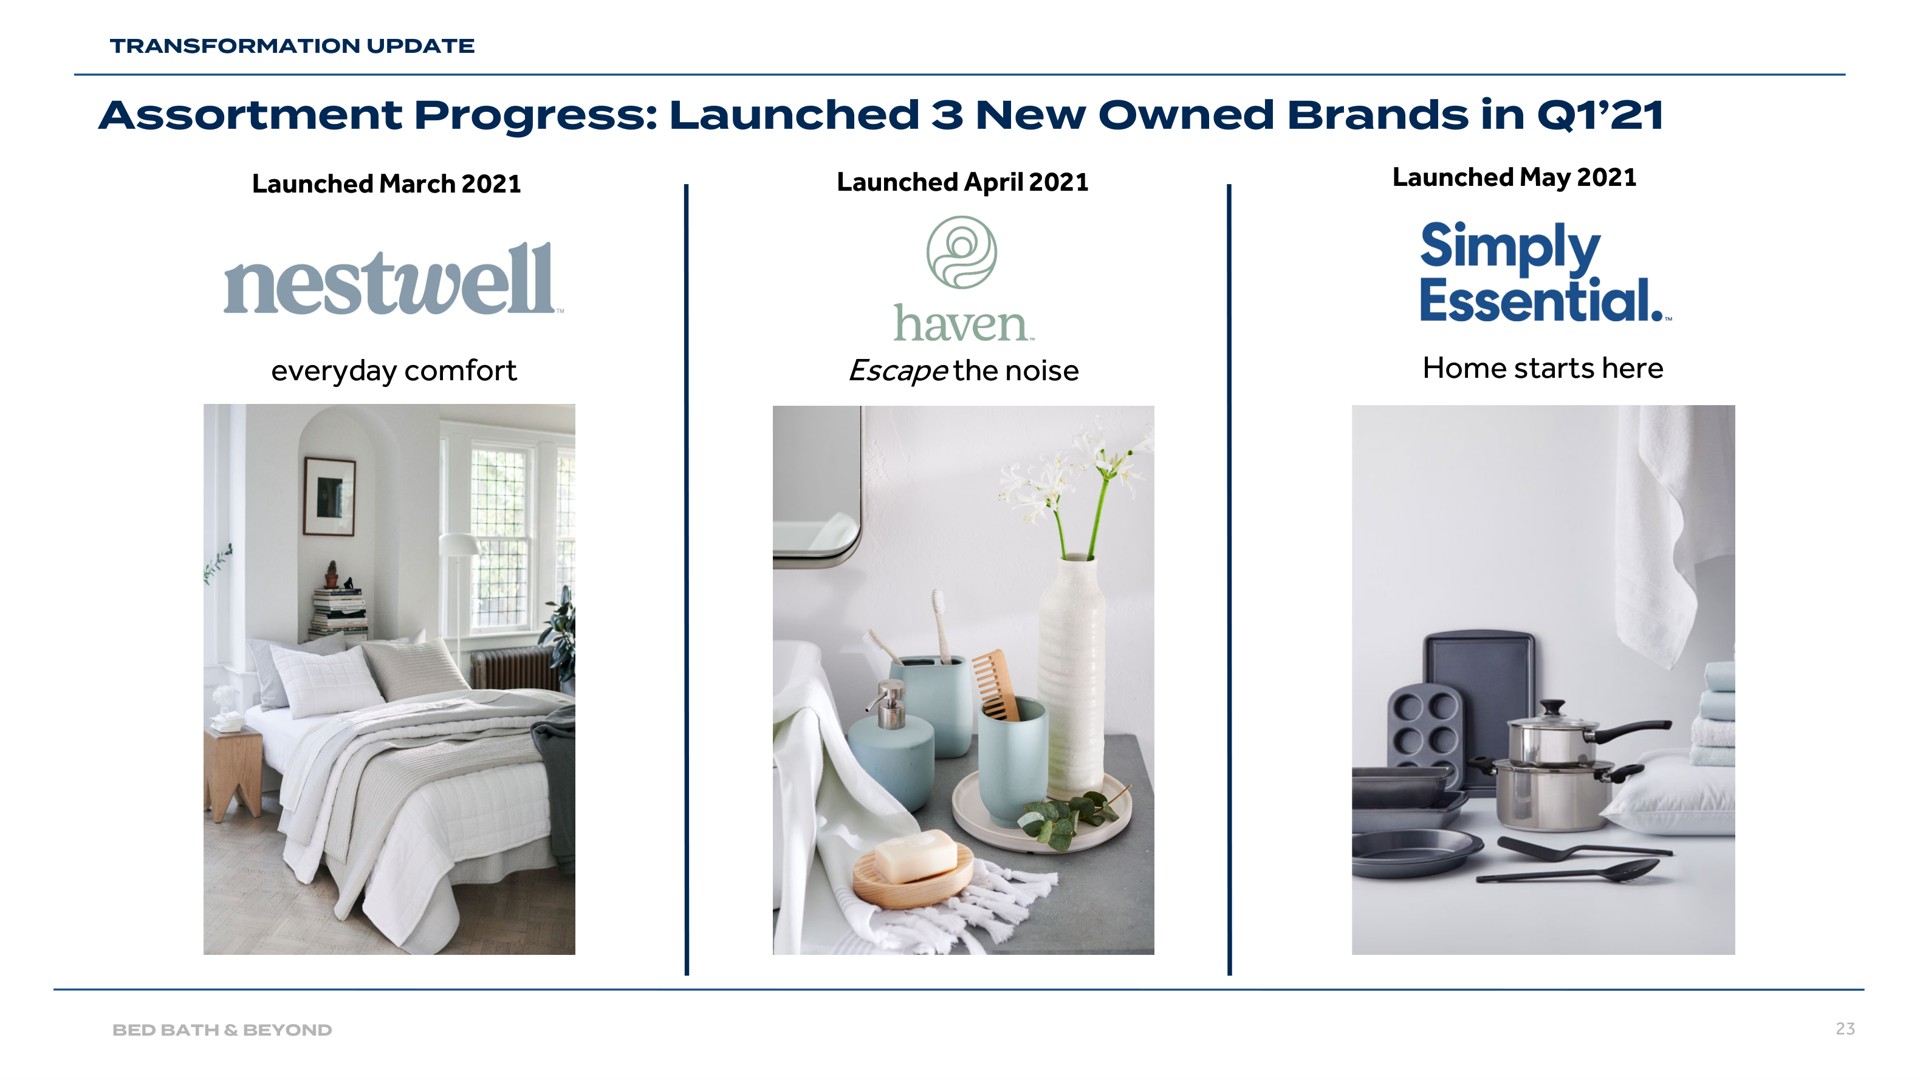 assortment progress launched new owned brands in haven essential | Bed Bath & Beyond